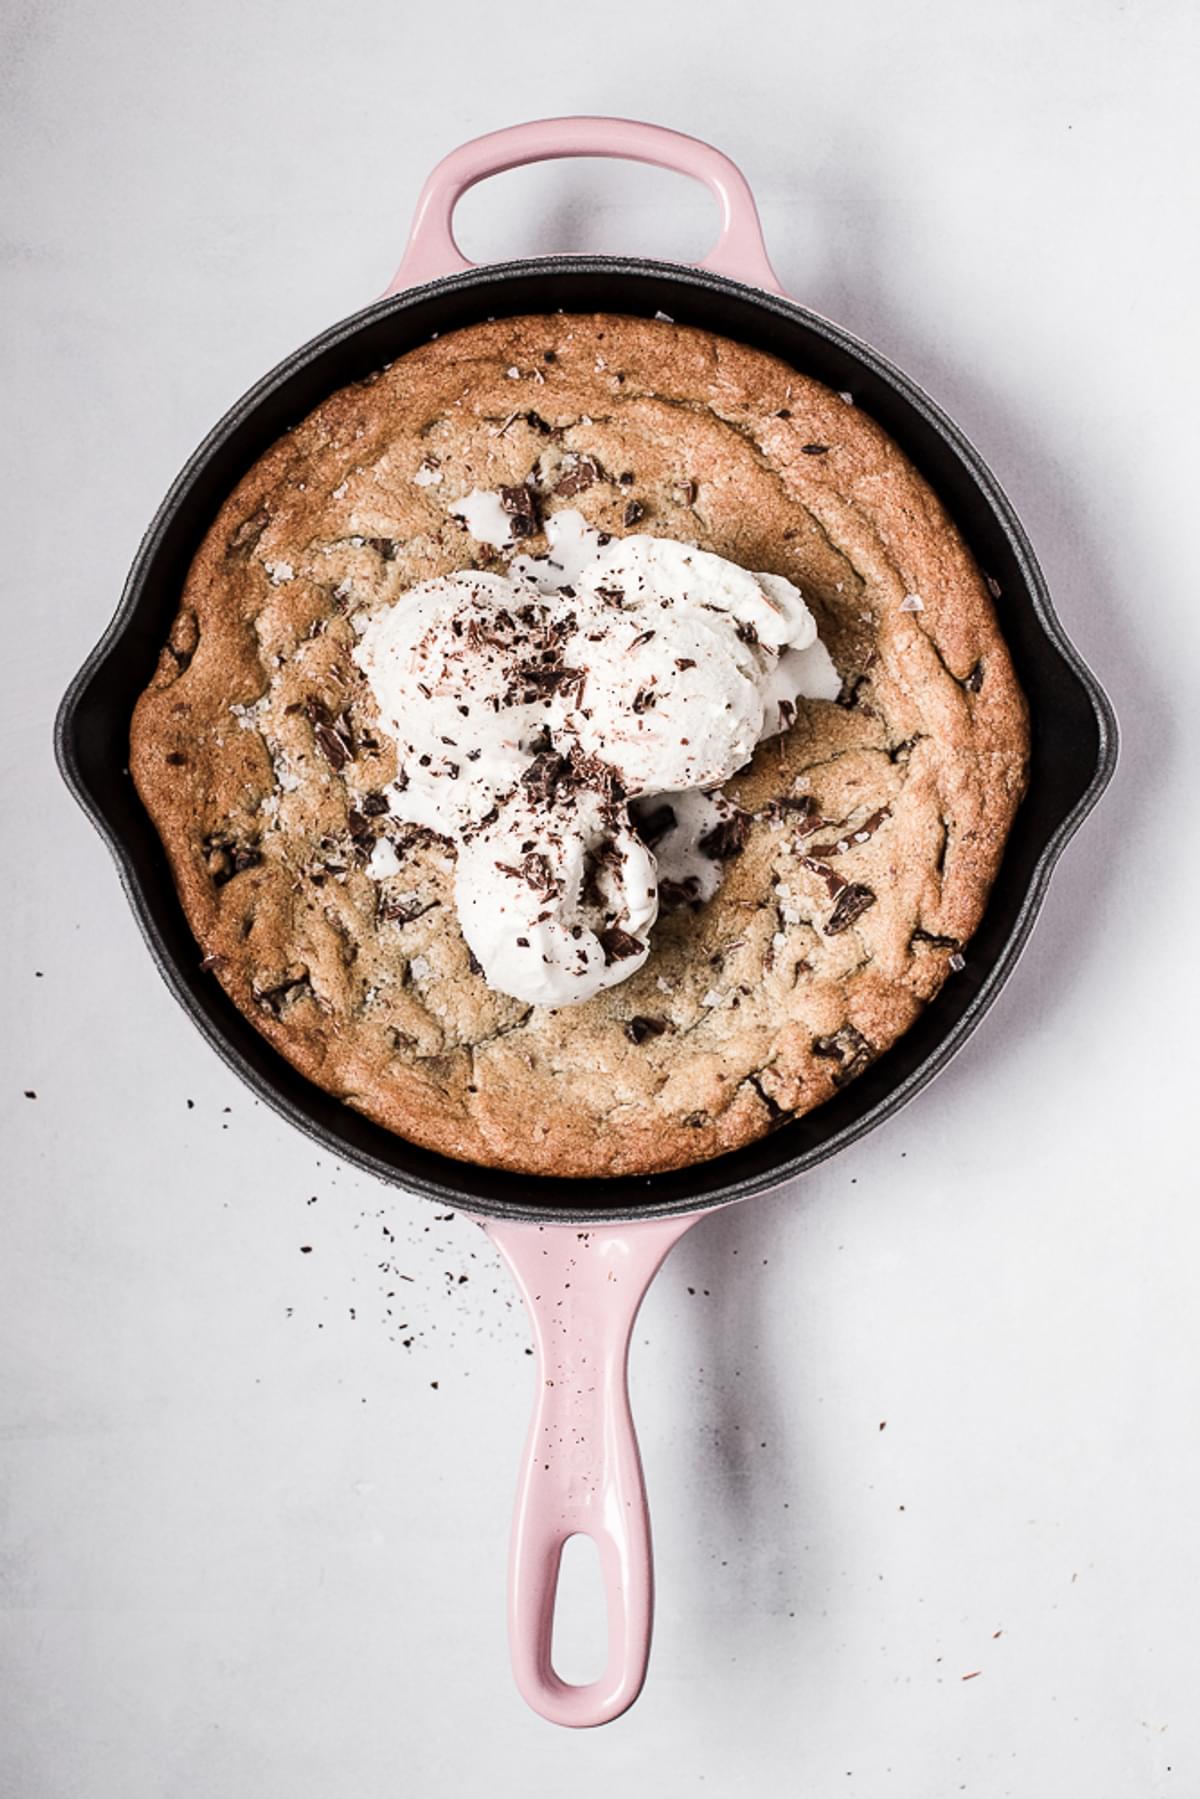 freshly baked chocolate chip skillet cookie in a pink cast iron skillet with ice cream